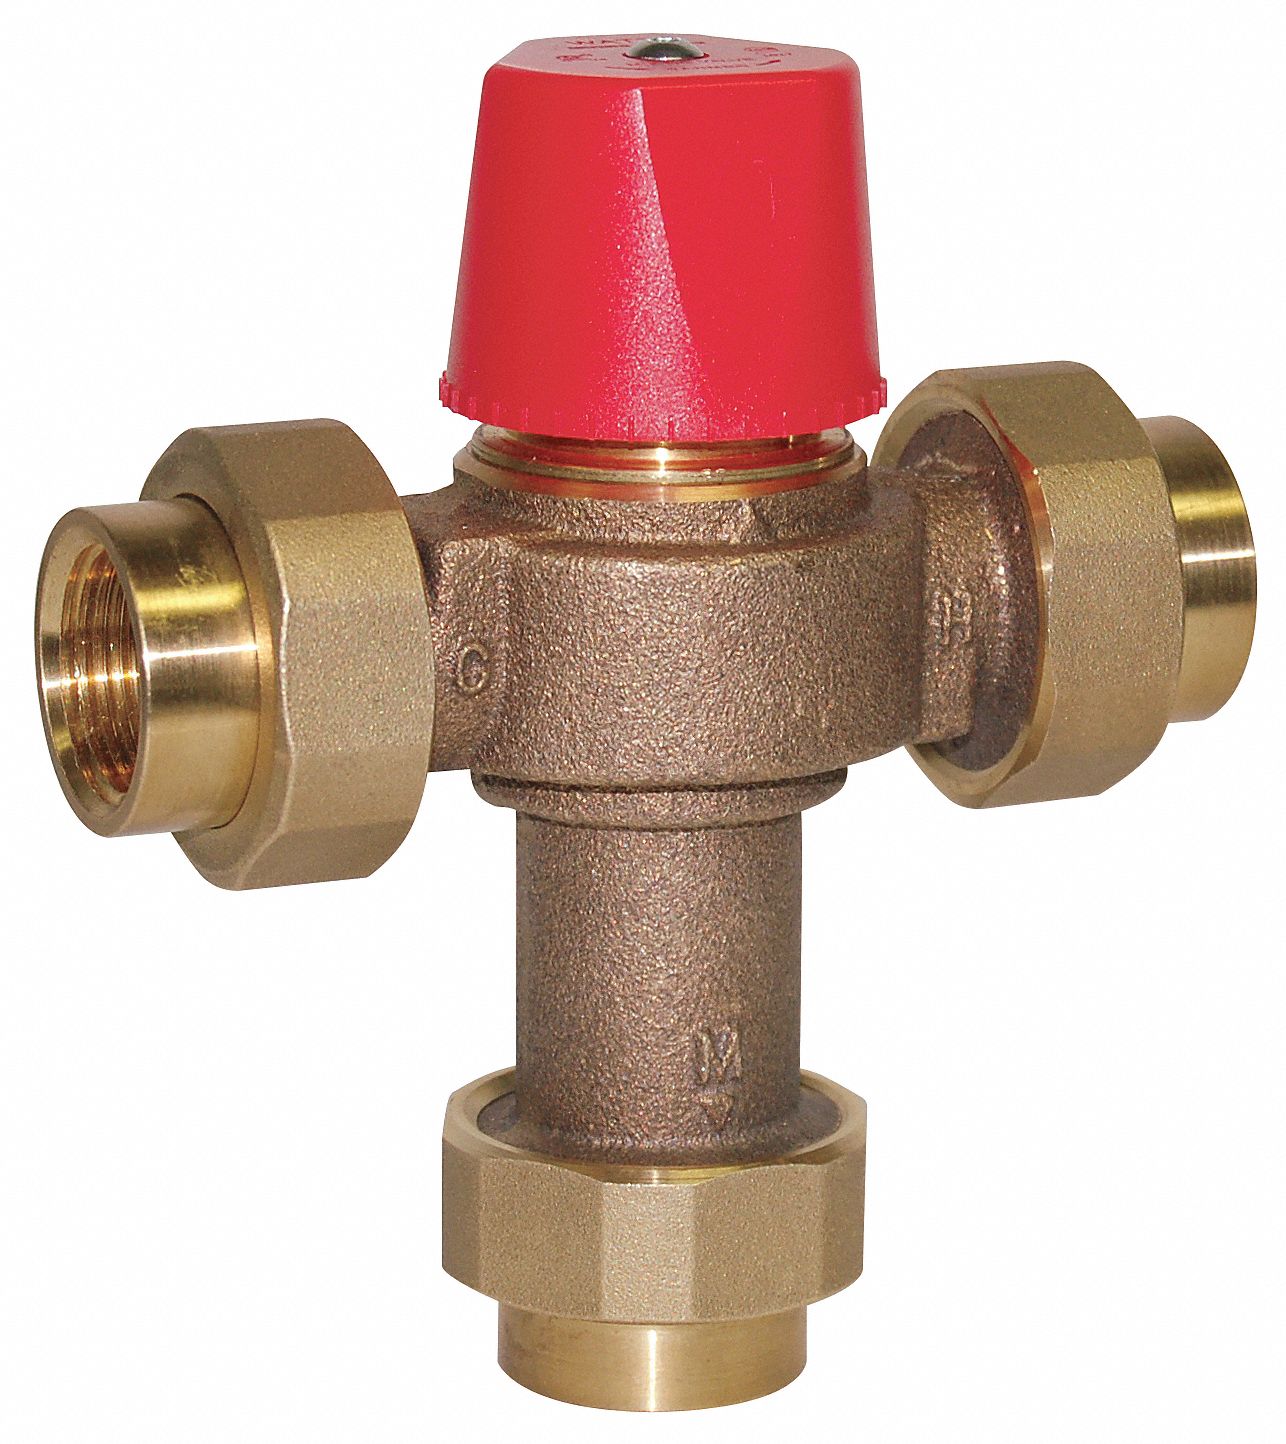 1/2 in FNPT Inlet Type Mixing Valve, Brass, 0.5 to 23 gpm